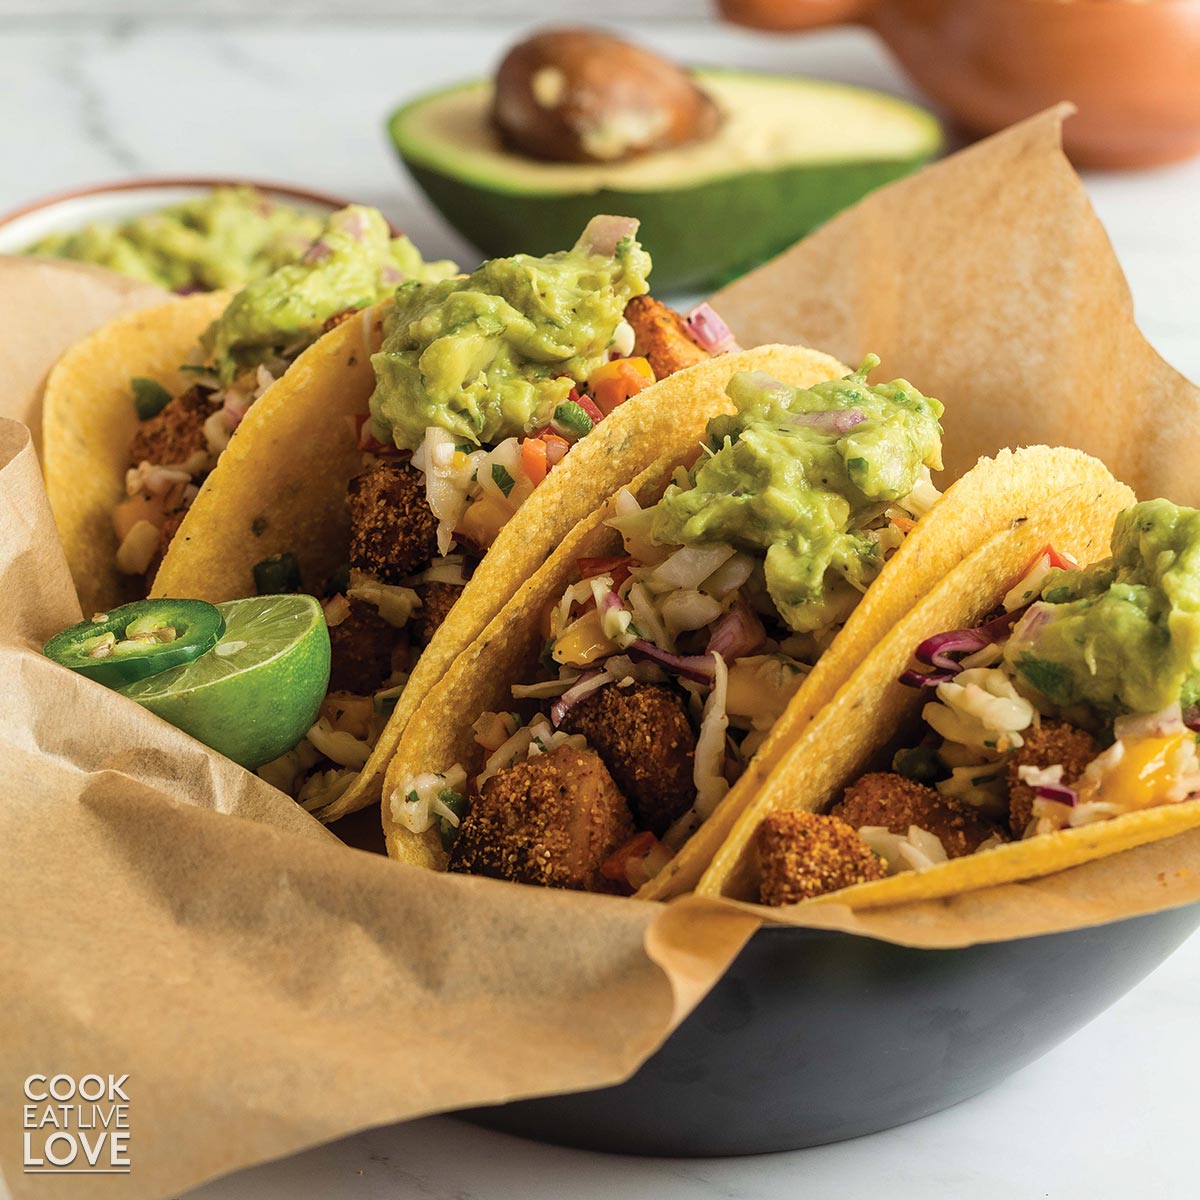 Basket of crispy vegan fish tacos topped with guacamole.